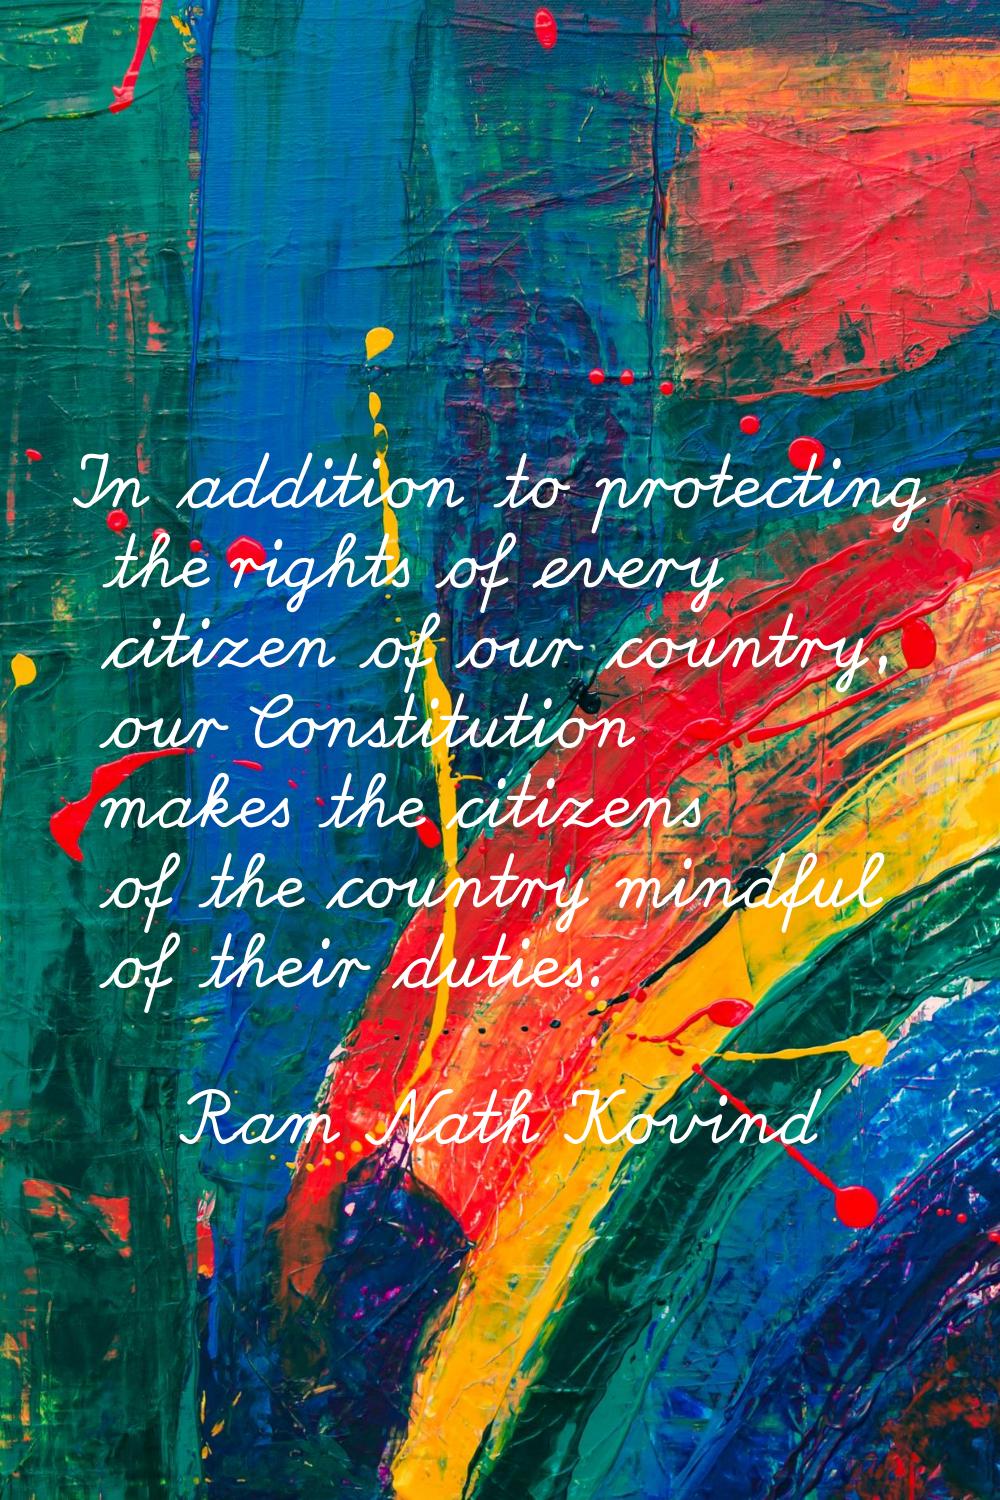 In addition to protecting the rights of every citizen of our country, our Constitution makes the ci